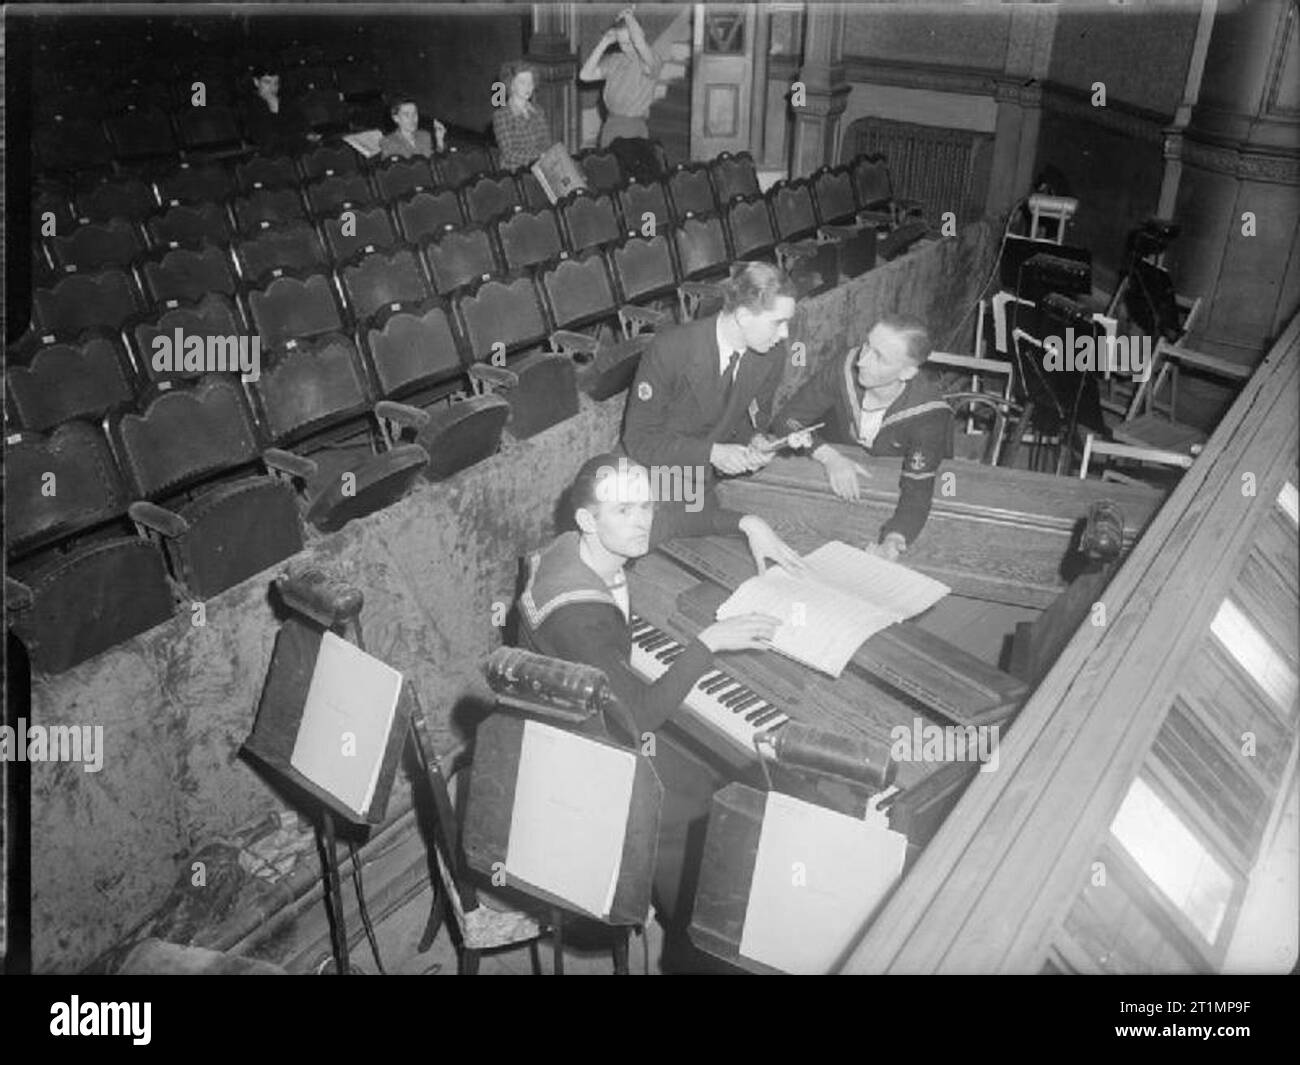 The Royal Navy during the Second World War Sat in the orchestra pit with their instruments are the trio of, left to right: Telegraphist Tony Fones; Sick Berth Attendant Denis Cockerton and Leading Seaman Bobby Pagan, who will accompany the show and are featured in the London production of the all navy show 'Pacific Show Boat' at the Lyric Theatre, Hammersmith. The show is being sent by Amenities Ships to the Pacific to entertain personnel of the British Pacific Fleet after its London run. Costumes and decor are by Sub Lieutenant Hedley Briggs and the musical numbers by Lieutenant Ronnie Hill. Stock Photo